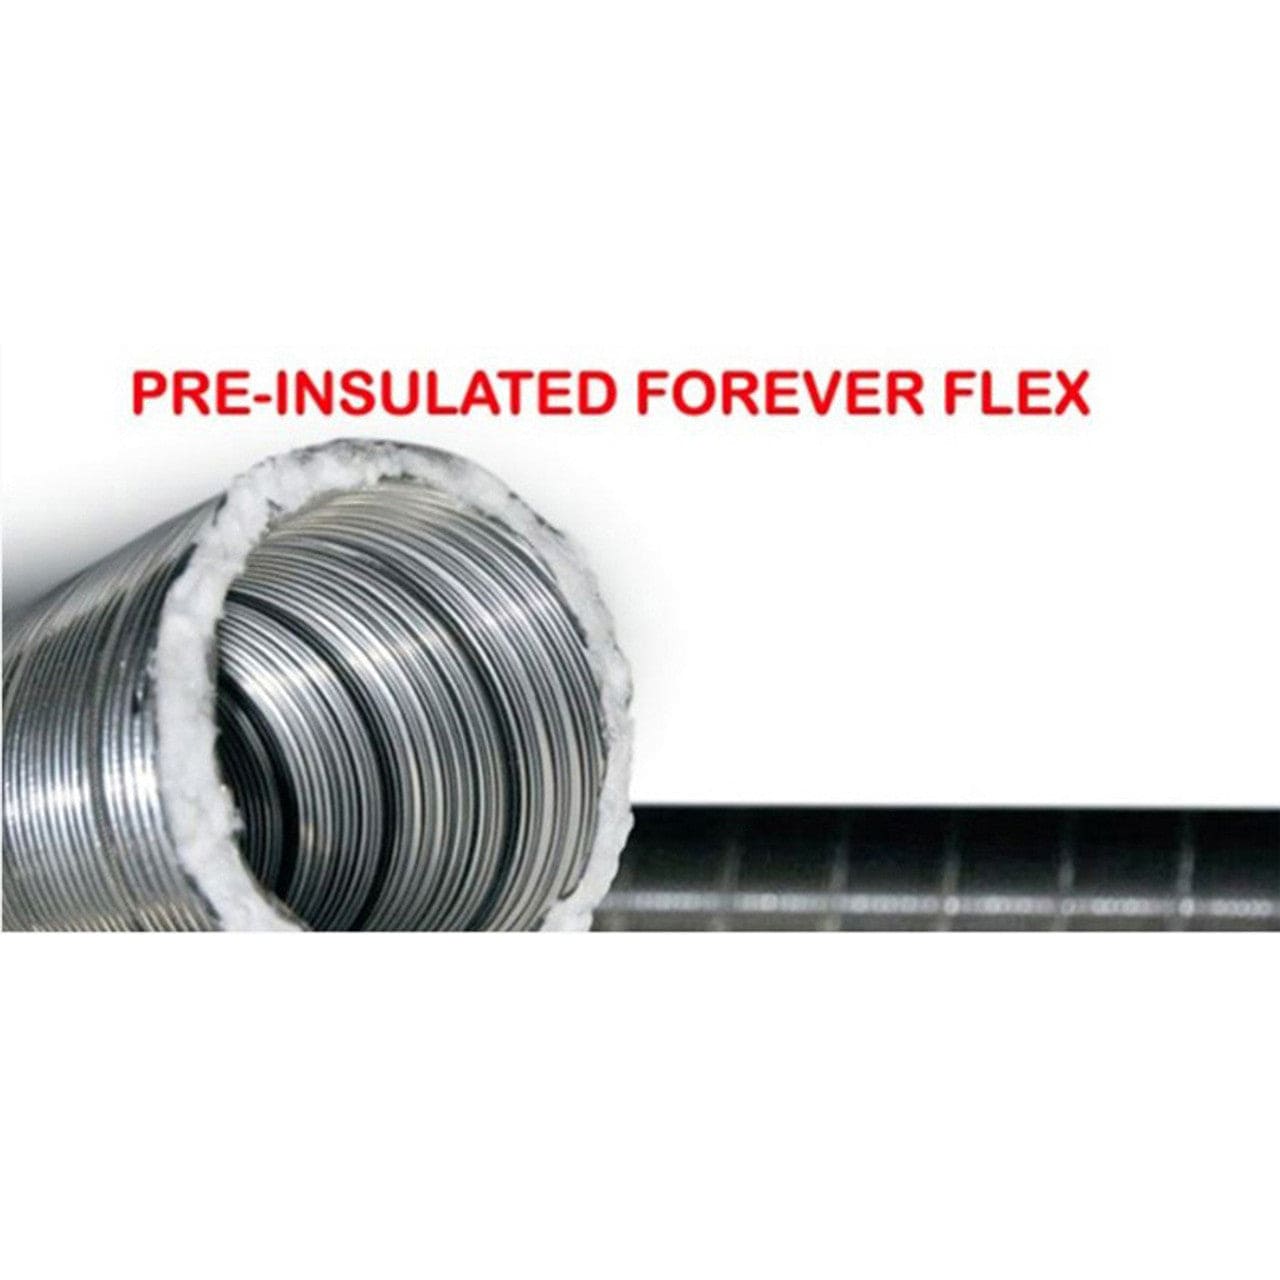 (DS) - 9" Premium Pre-Insulated Forever Flex 316Ti-Alloy .005 Stainless Cut-to-Length Liner -L5S9PI - Chimney Cricket